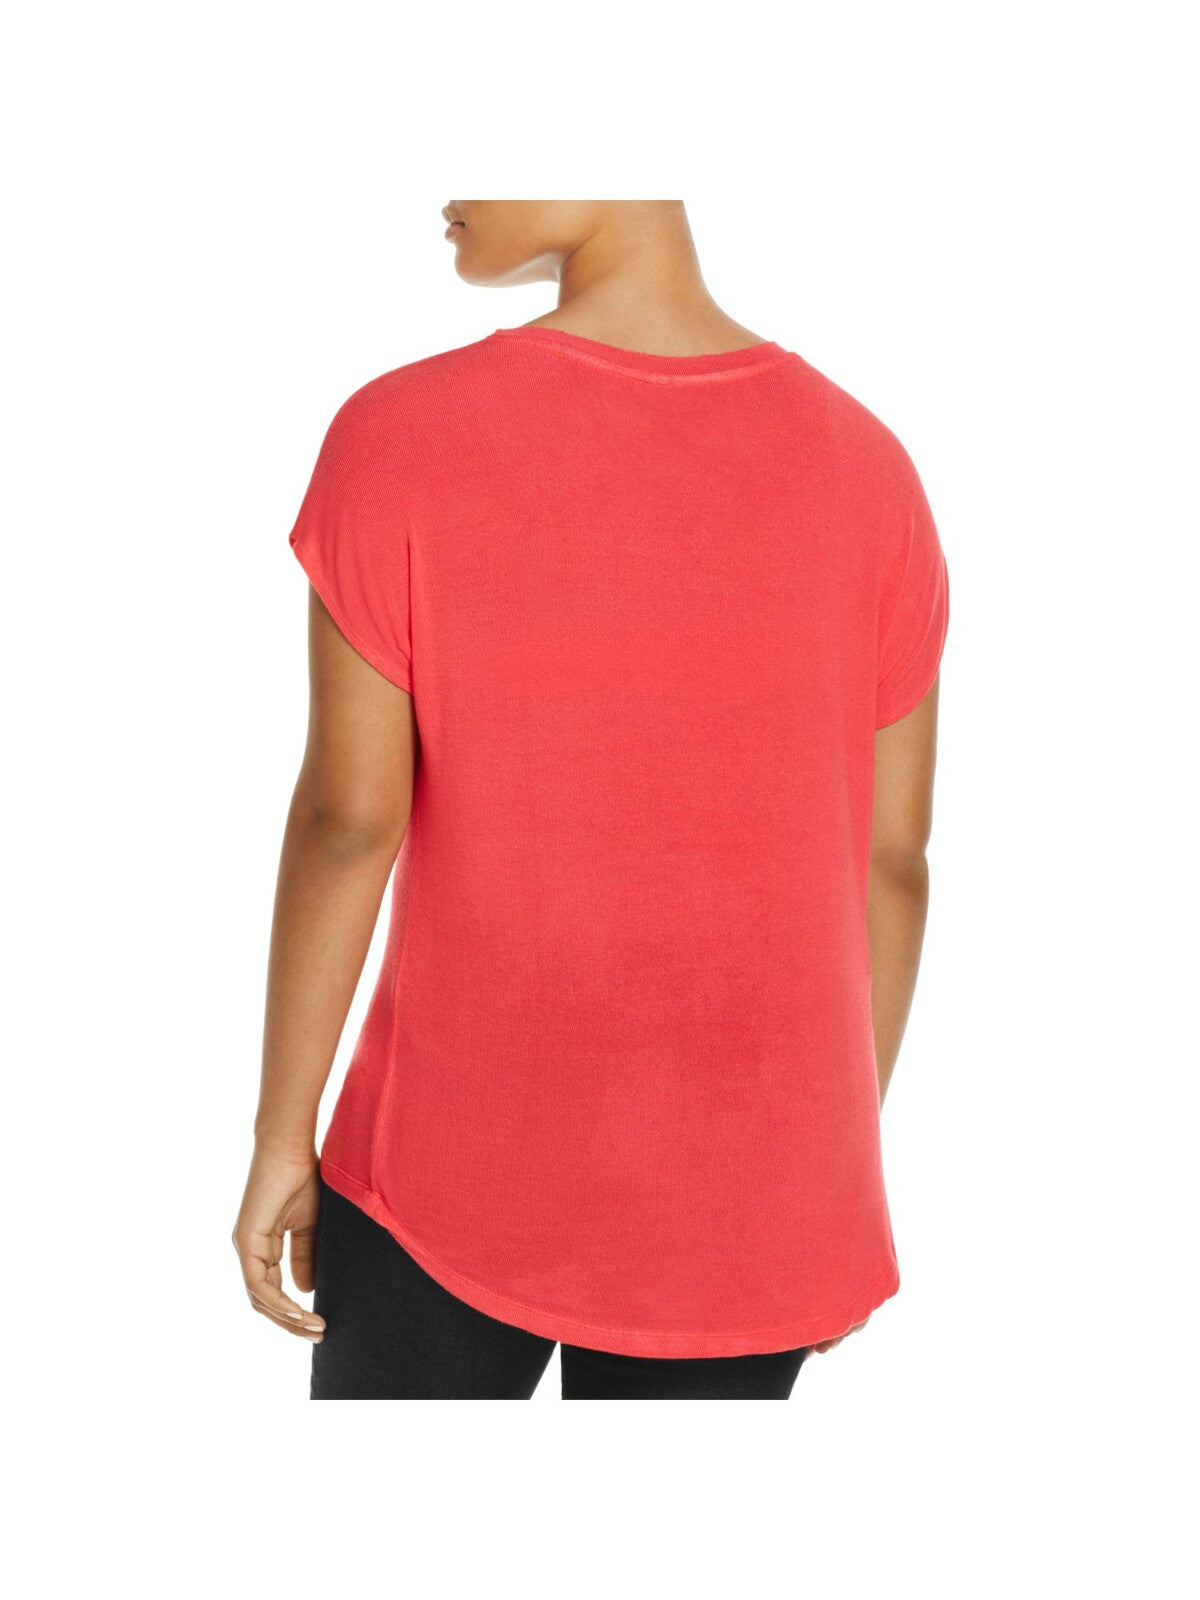 COLLECTION BY BOBEAU Womens Red Stretch Ribbed Short Sleeve Scoop Neck Top Plus 2X